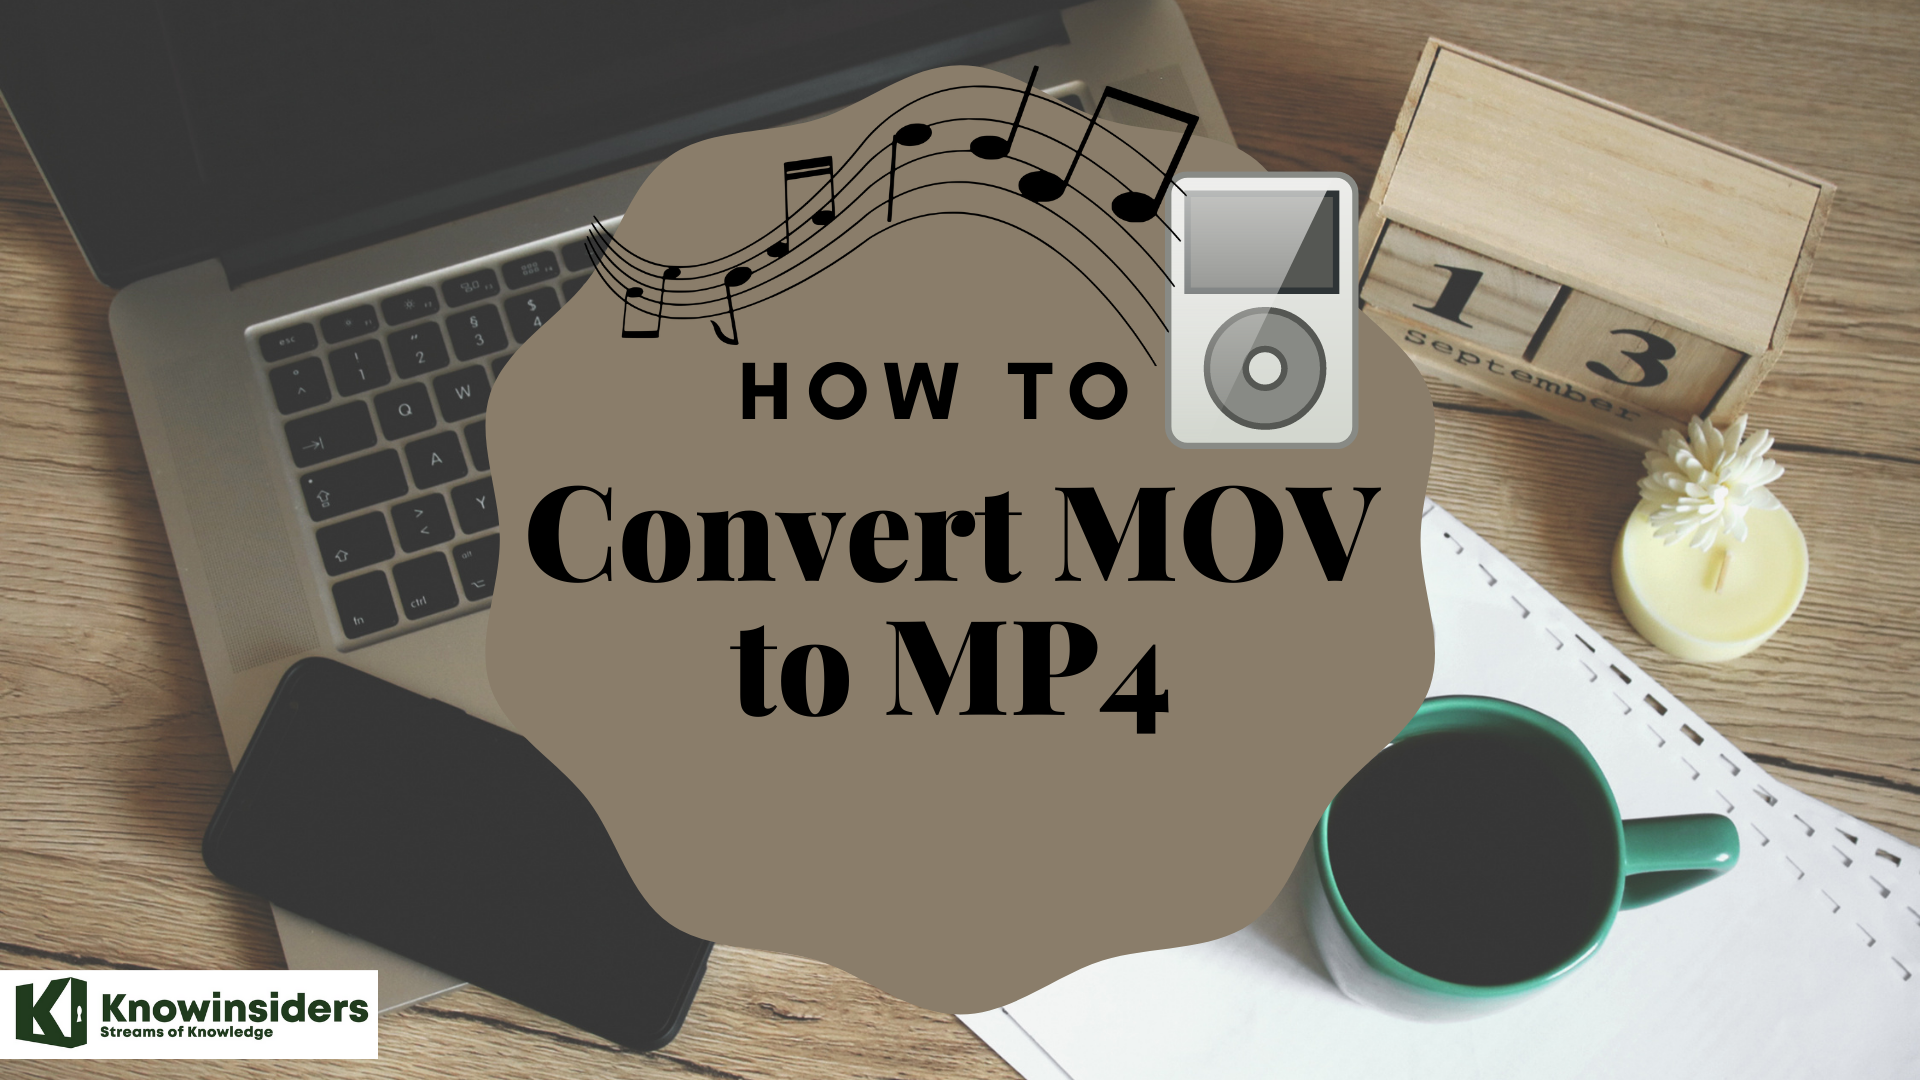 How to convert MOV to MP4 